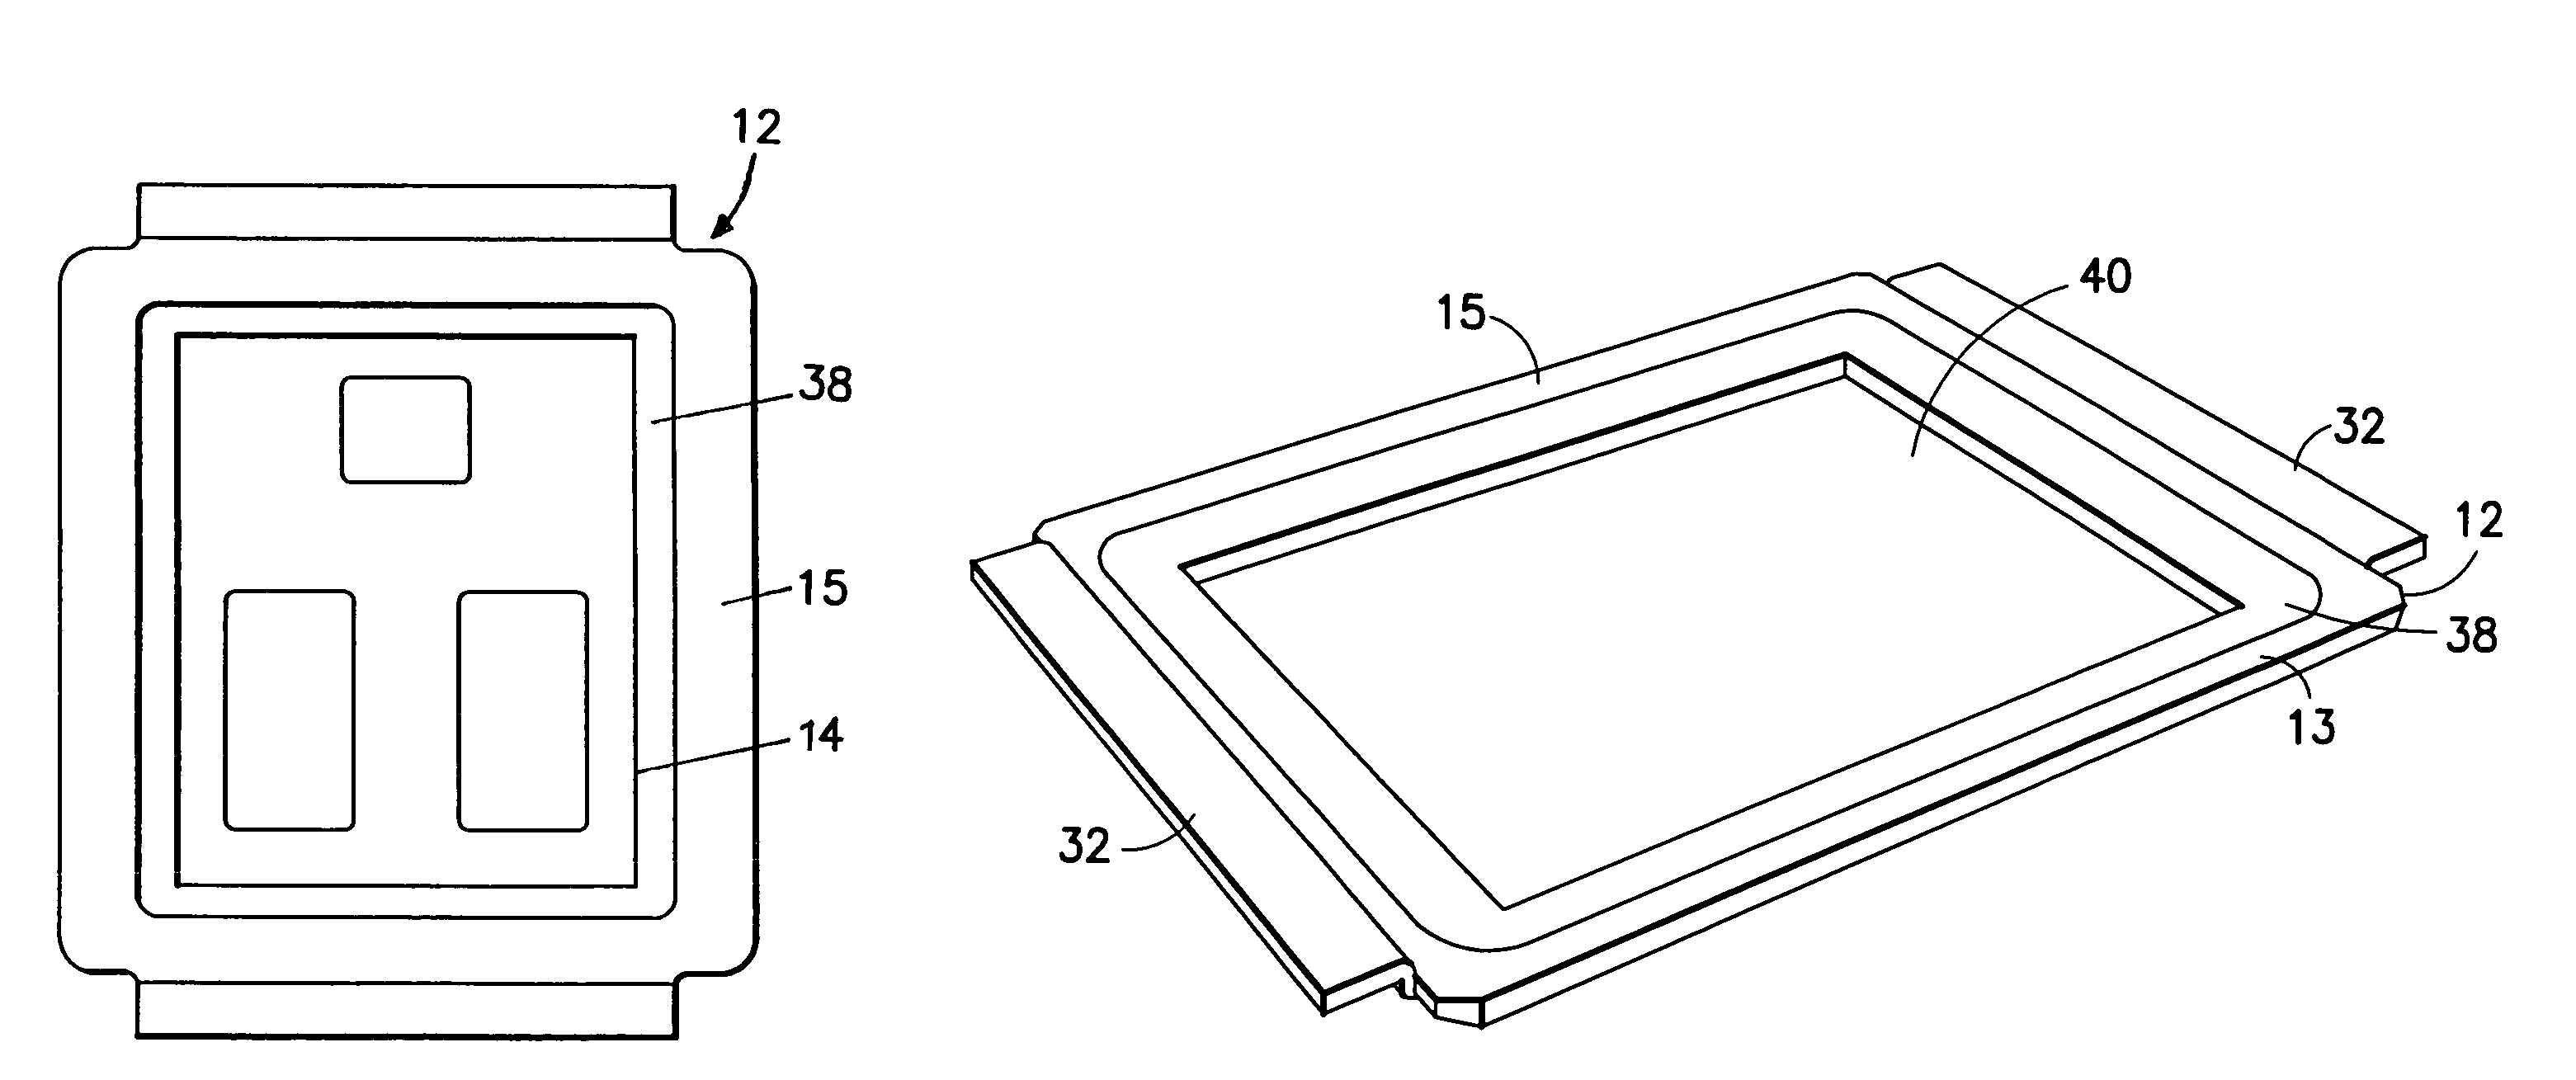 Chip-scale package